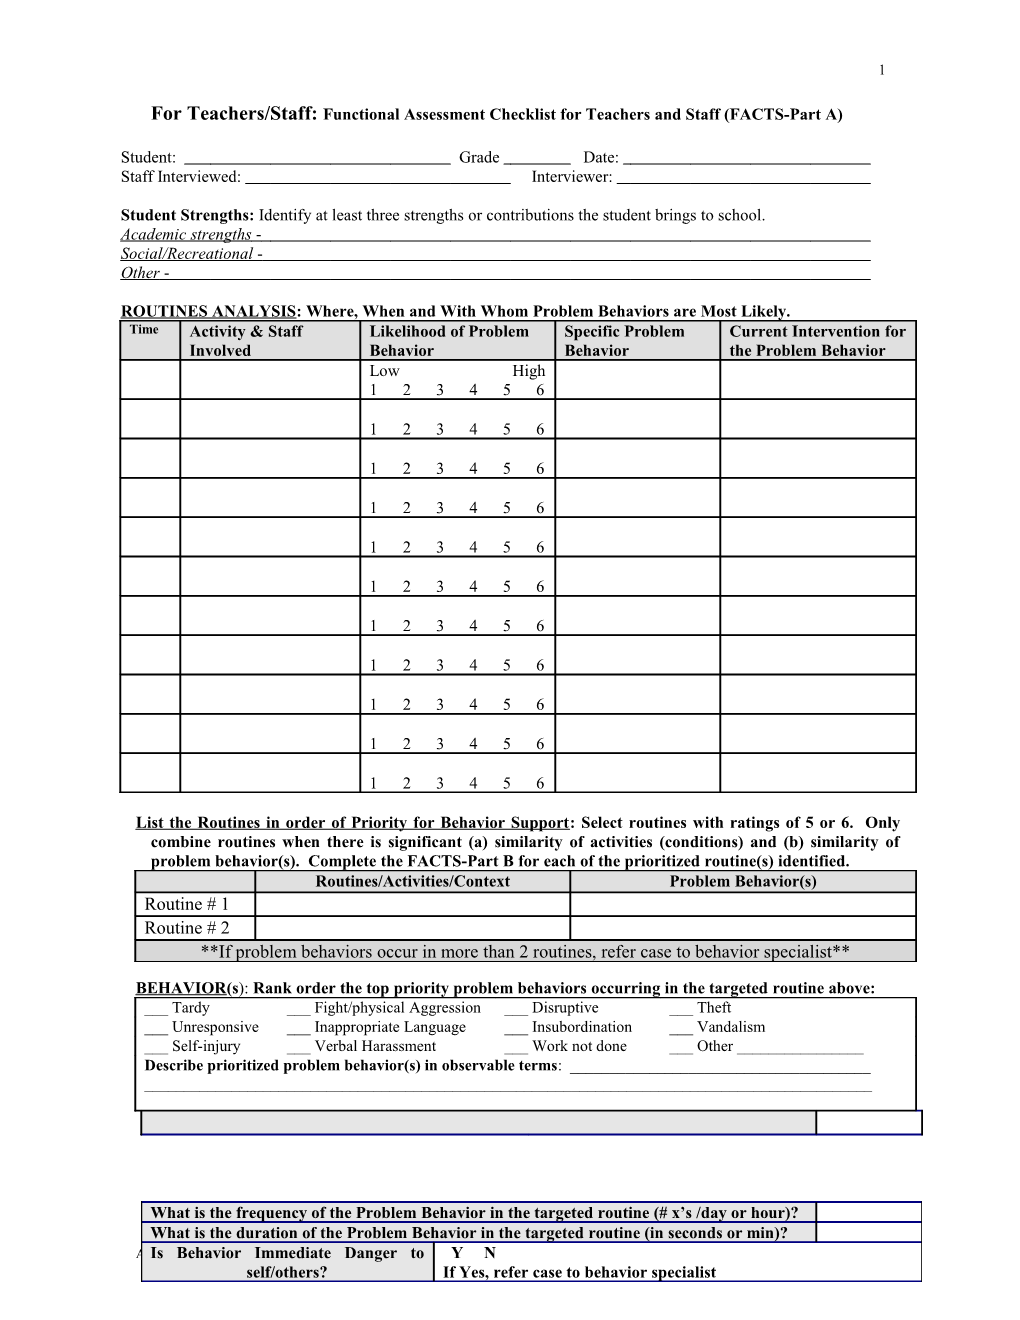 Functional Assessment Checklist for Teachers and Staff (FACTS-Part A) s1